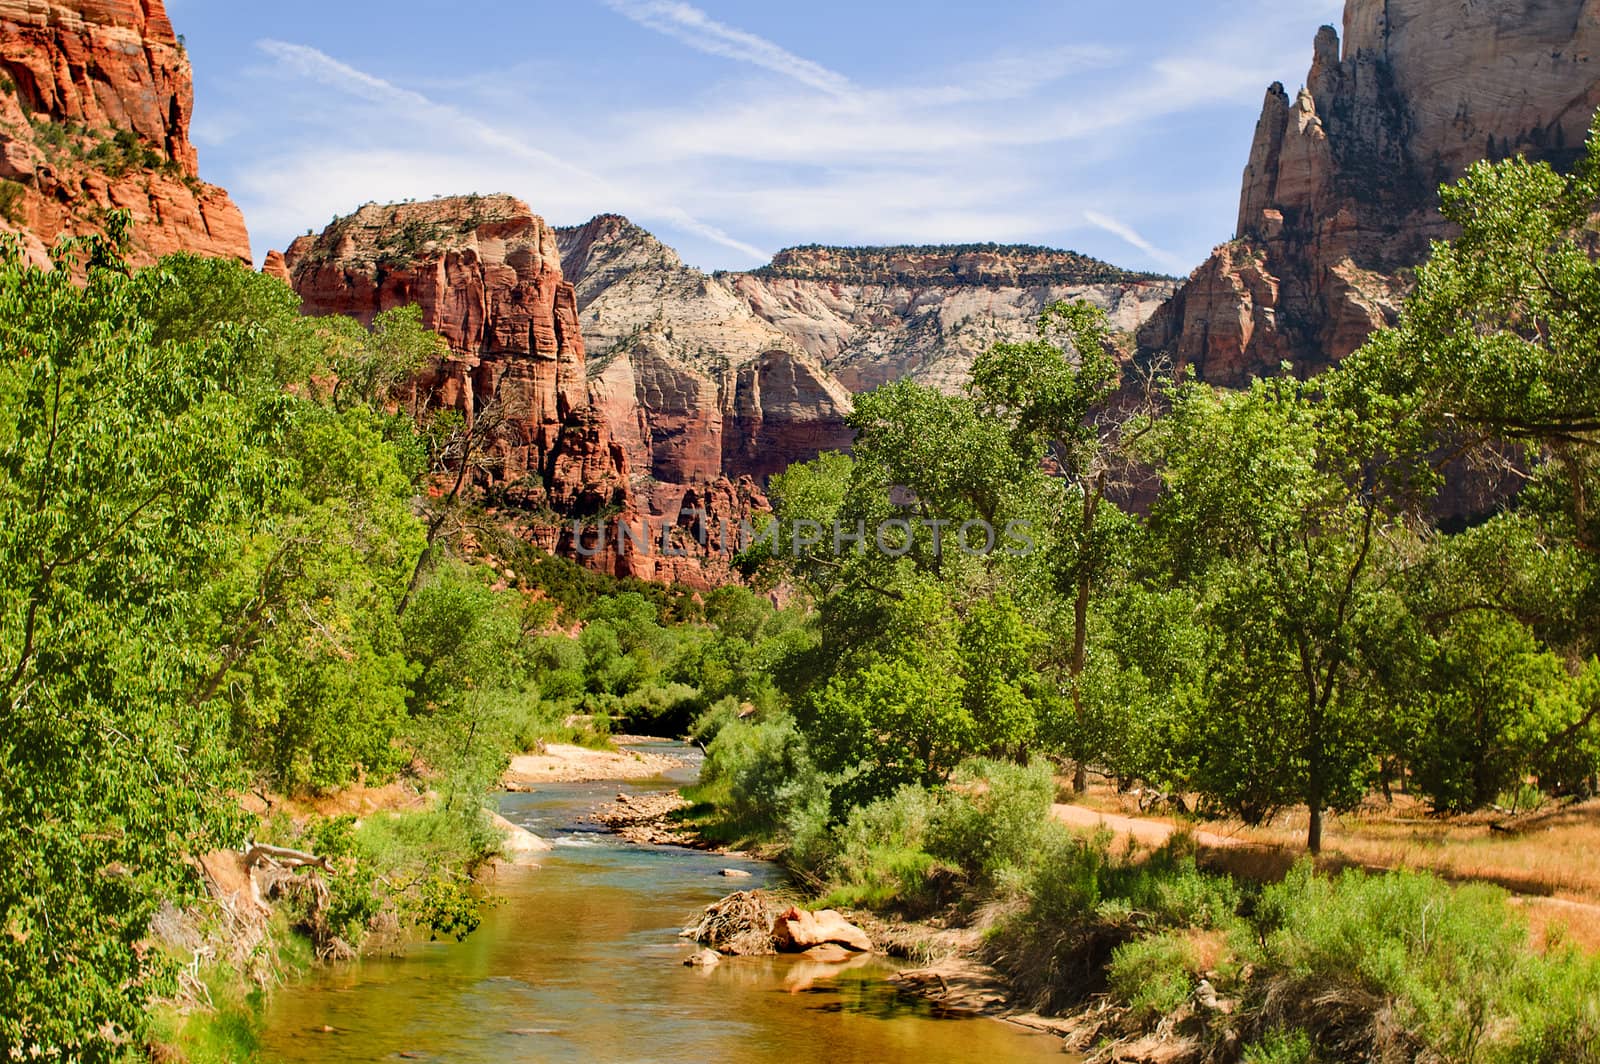 Scenic views of the State park Zion Park in Utah